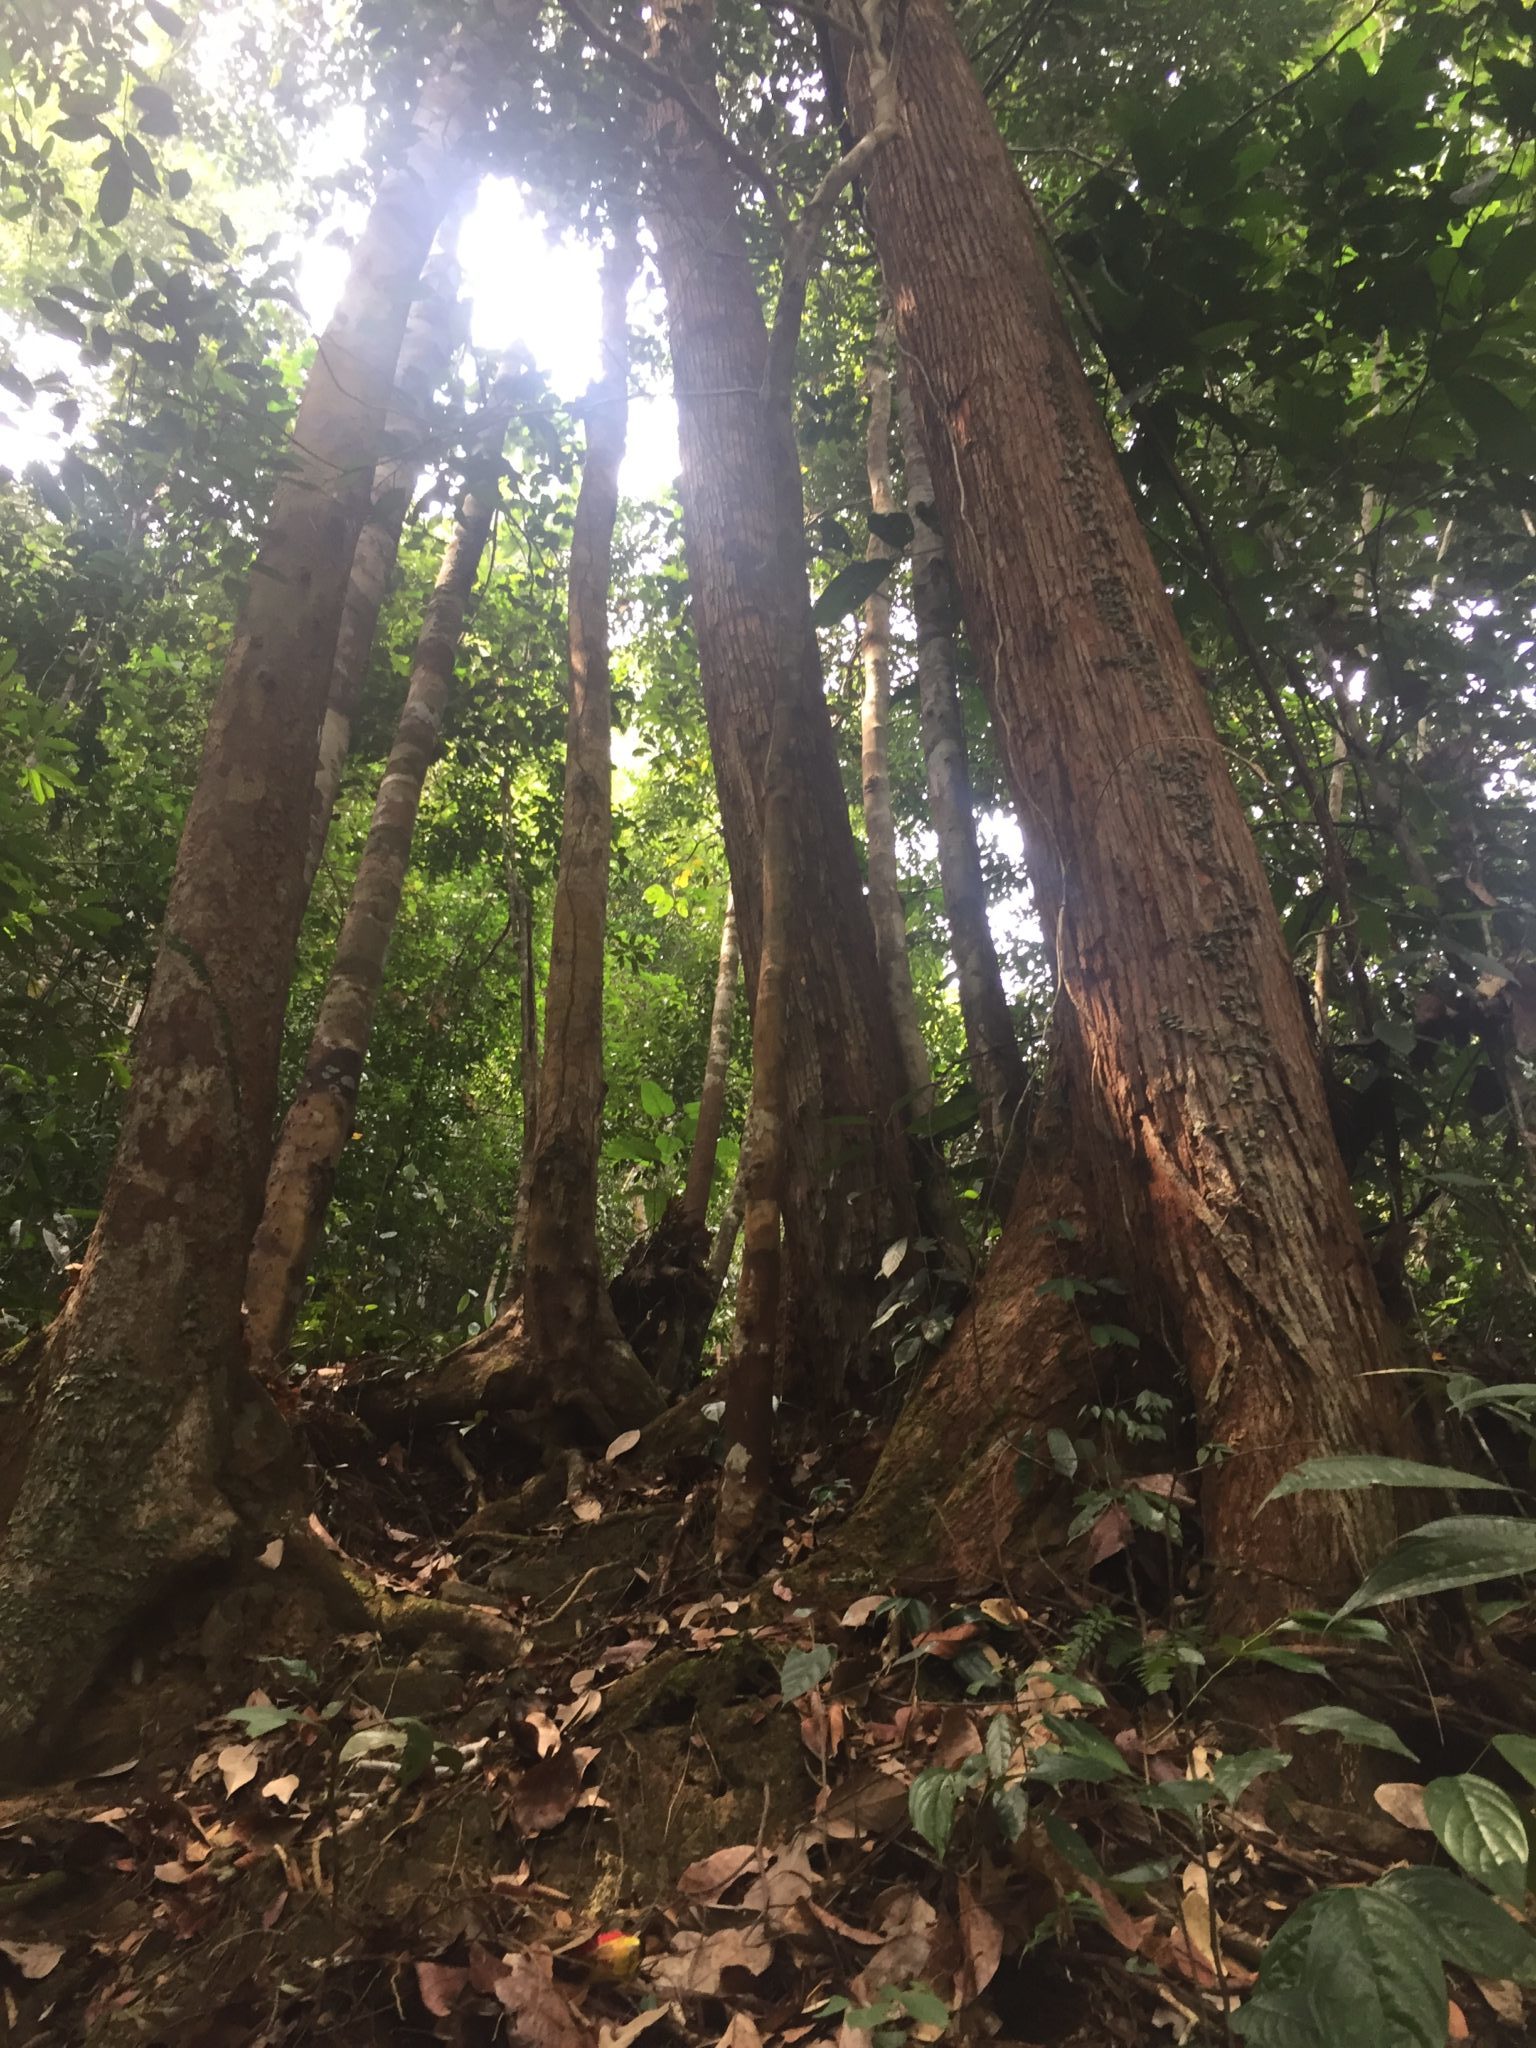 Forest near Long Lawen Village, Sarawak, Malaysia, which is protected under an agreement with Seacology